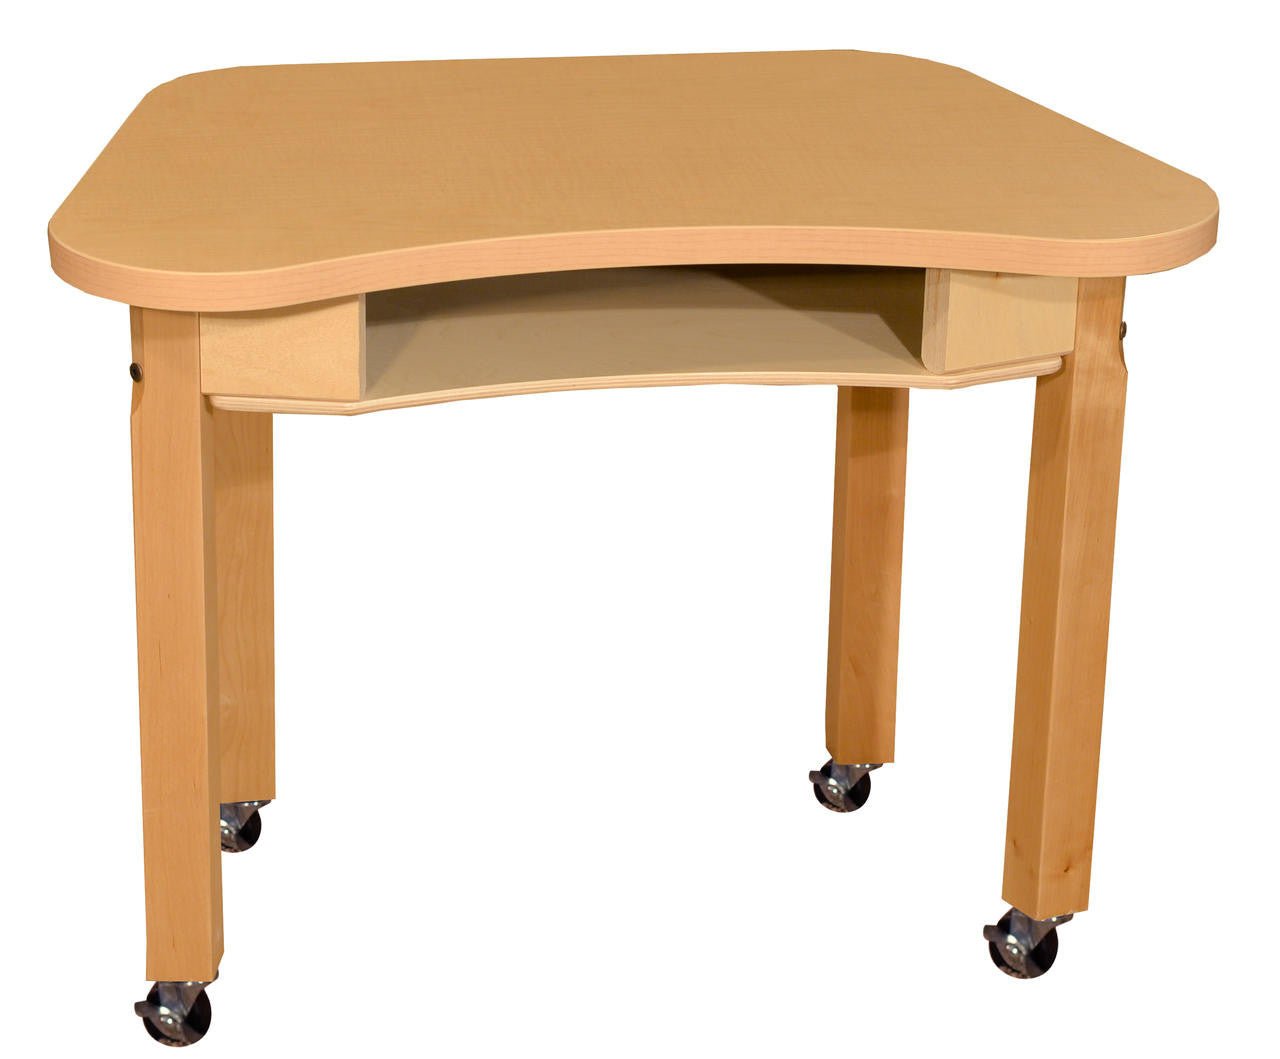 Mobile Synergy 18" x 30" High Pressure Laminate Desk with Hardwood Legs- 22"